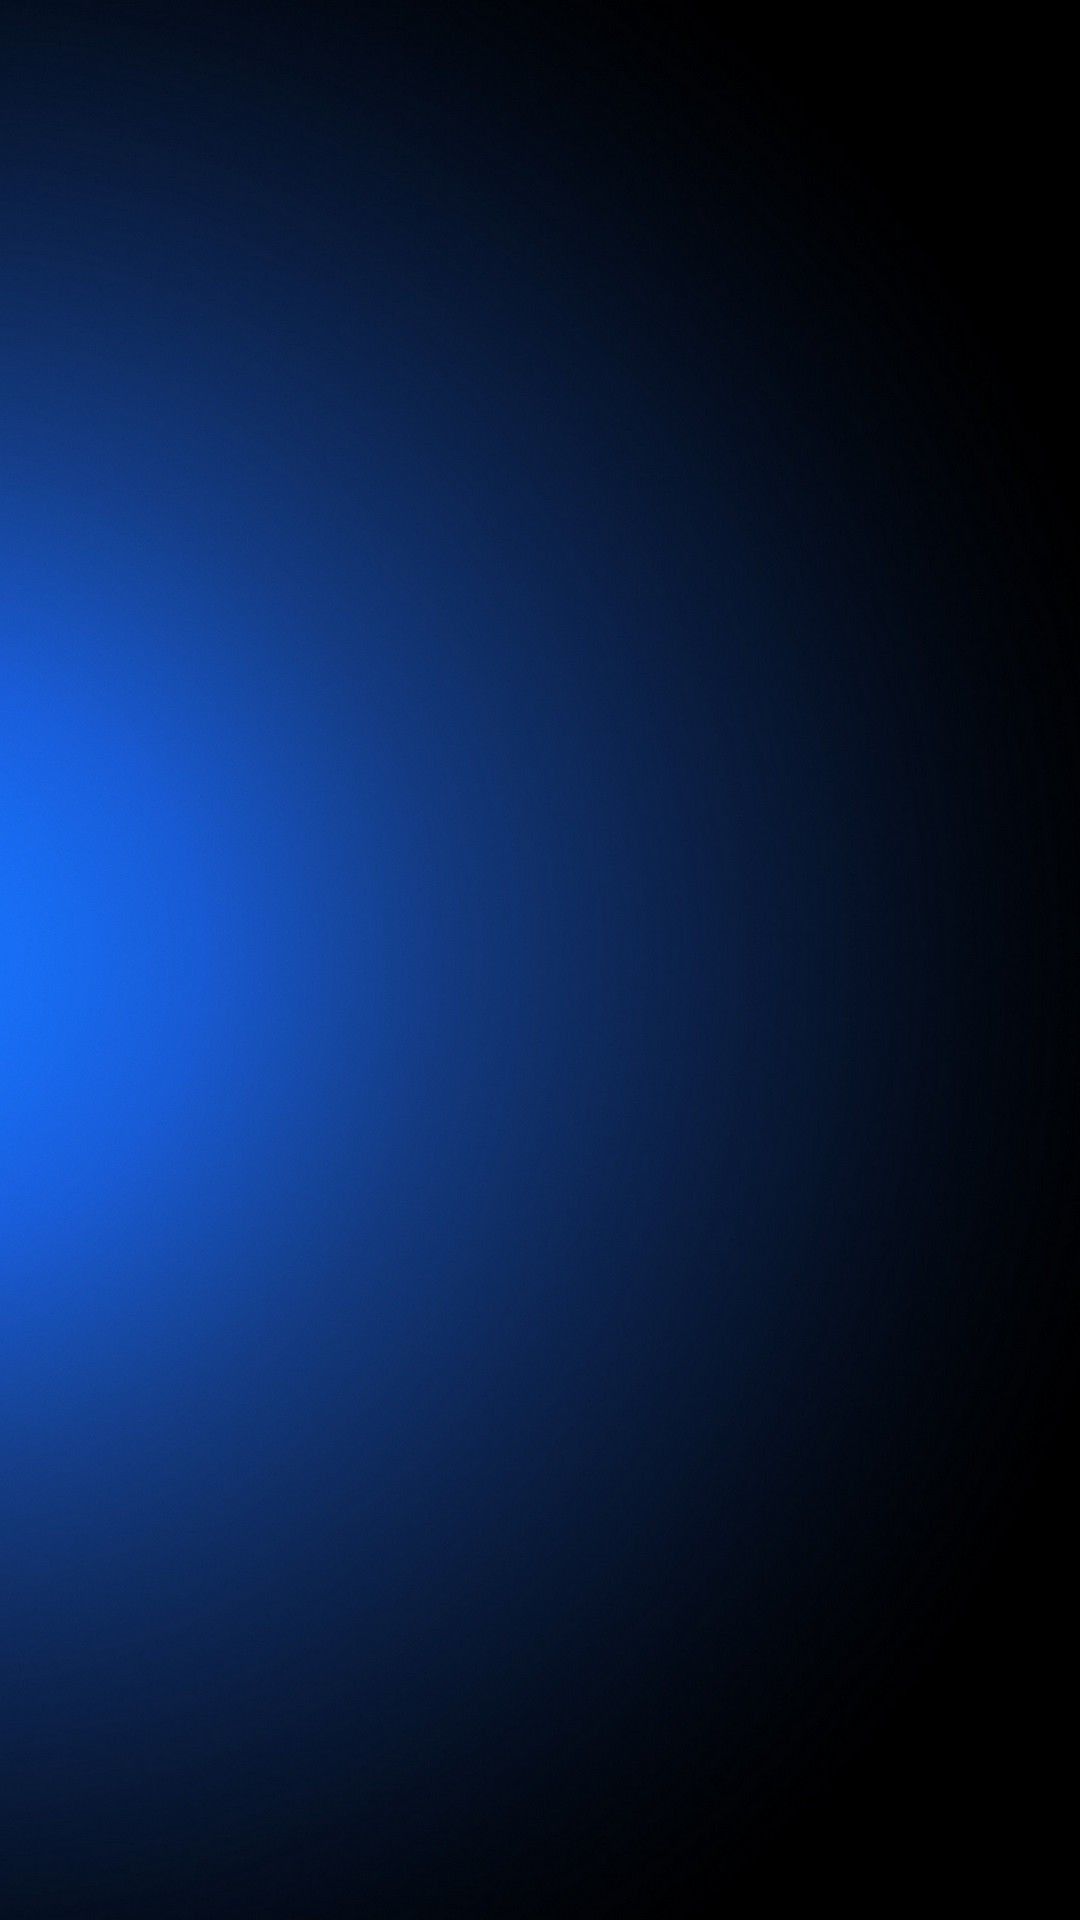 Dark Blue Gradient Android Wallpapers  Wallpaper Cave